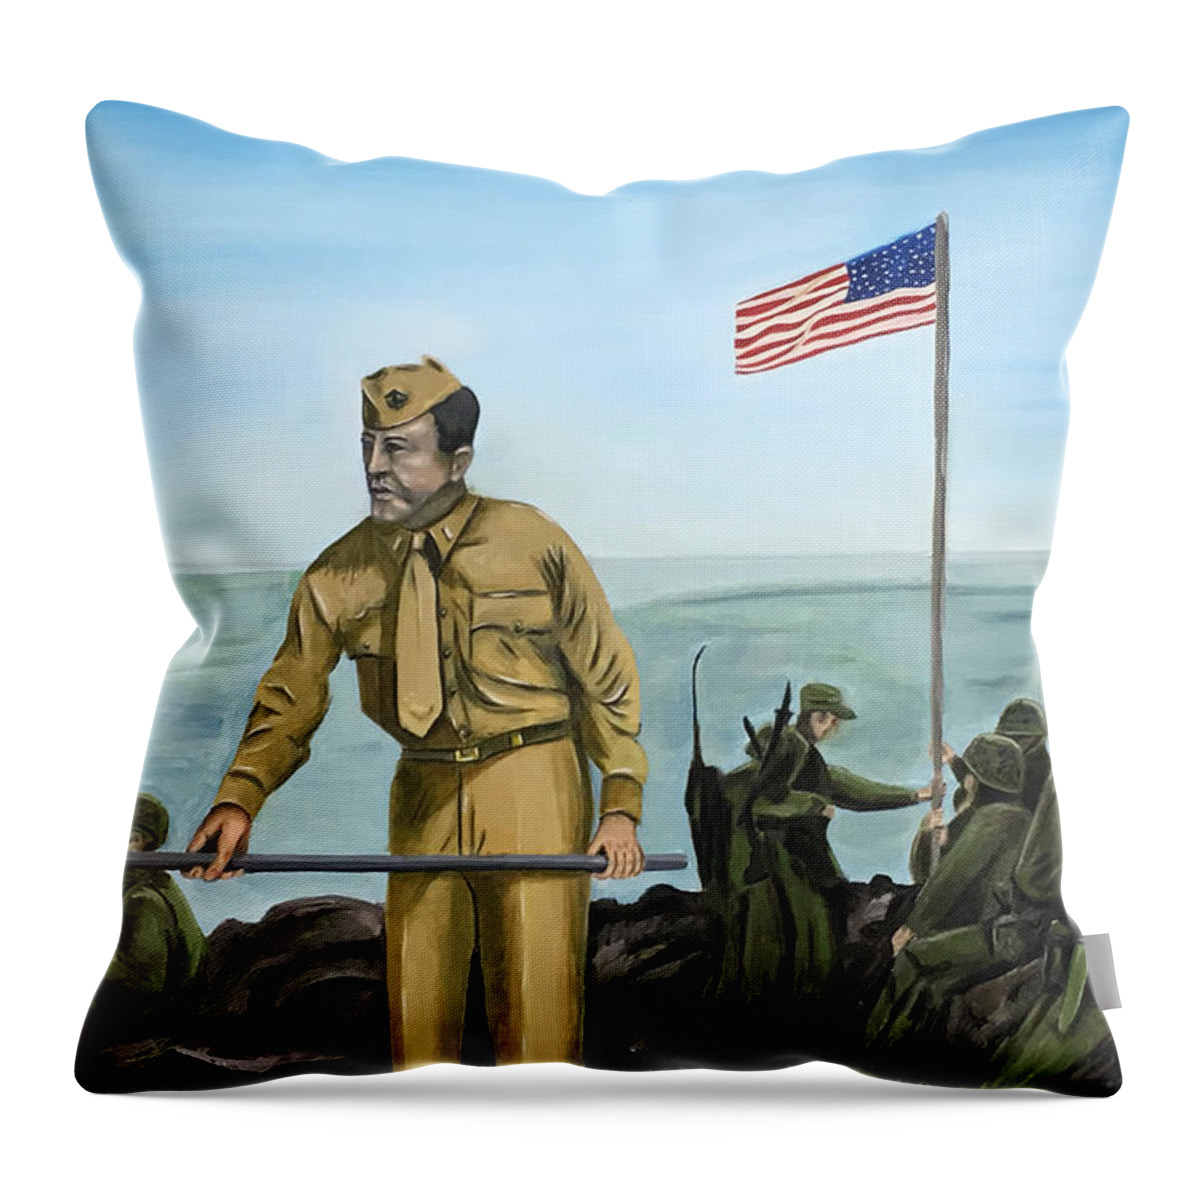  Throw Pillow featuring the painting First Flag Raising Iwo Jima by Dean Glorso